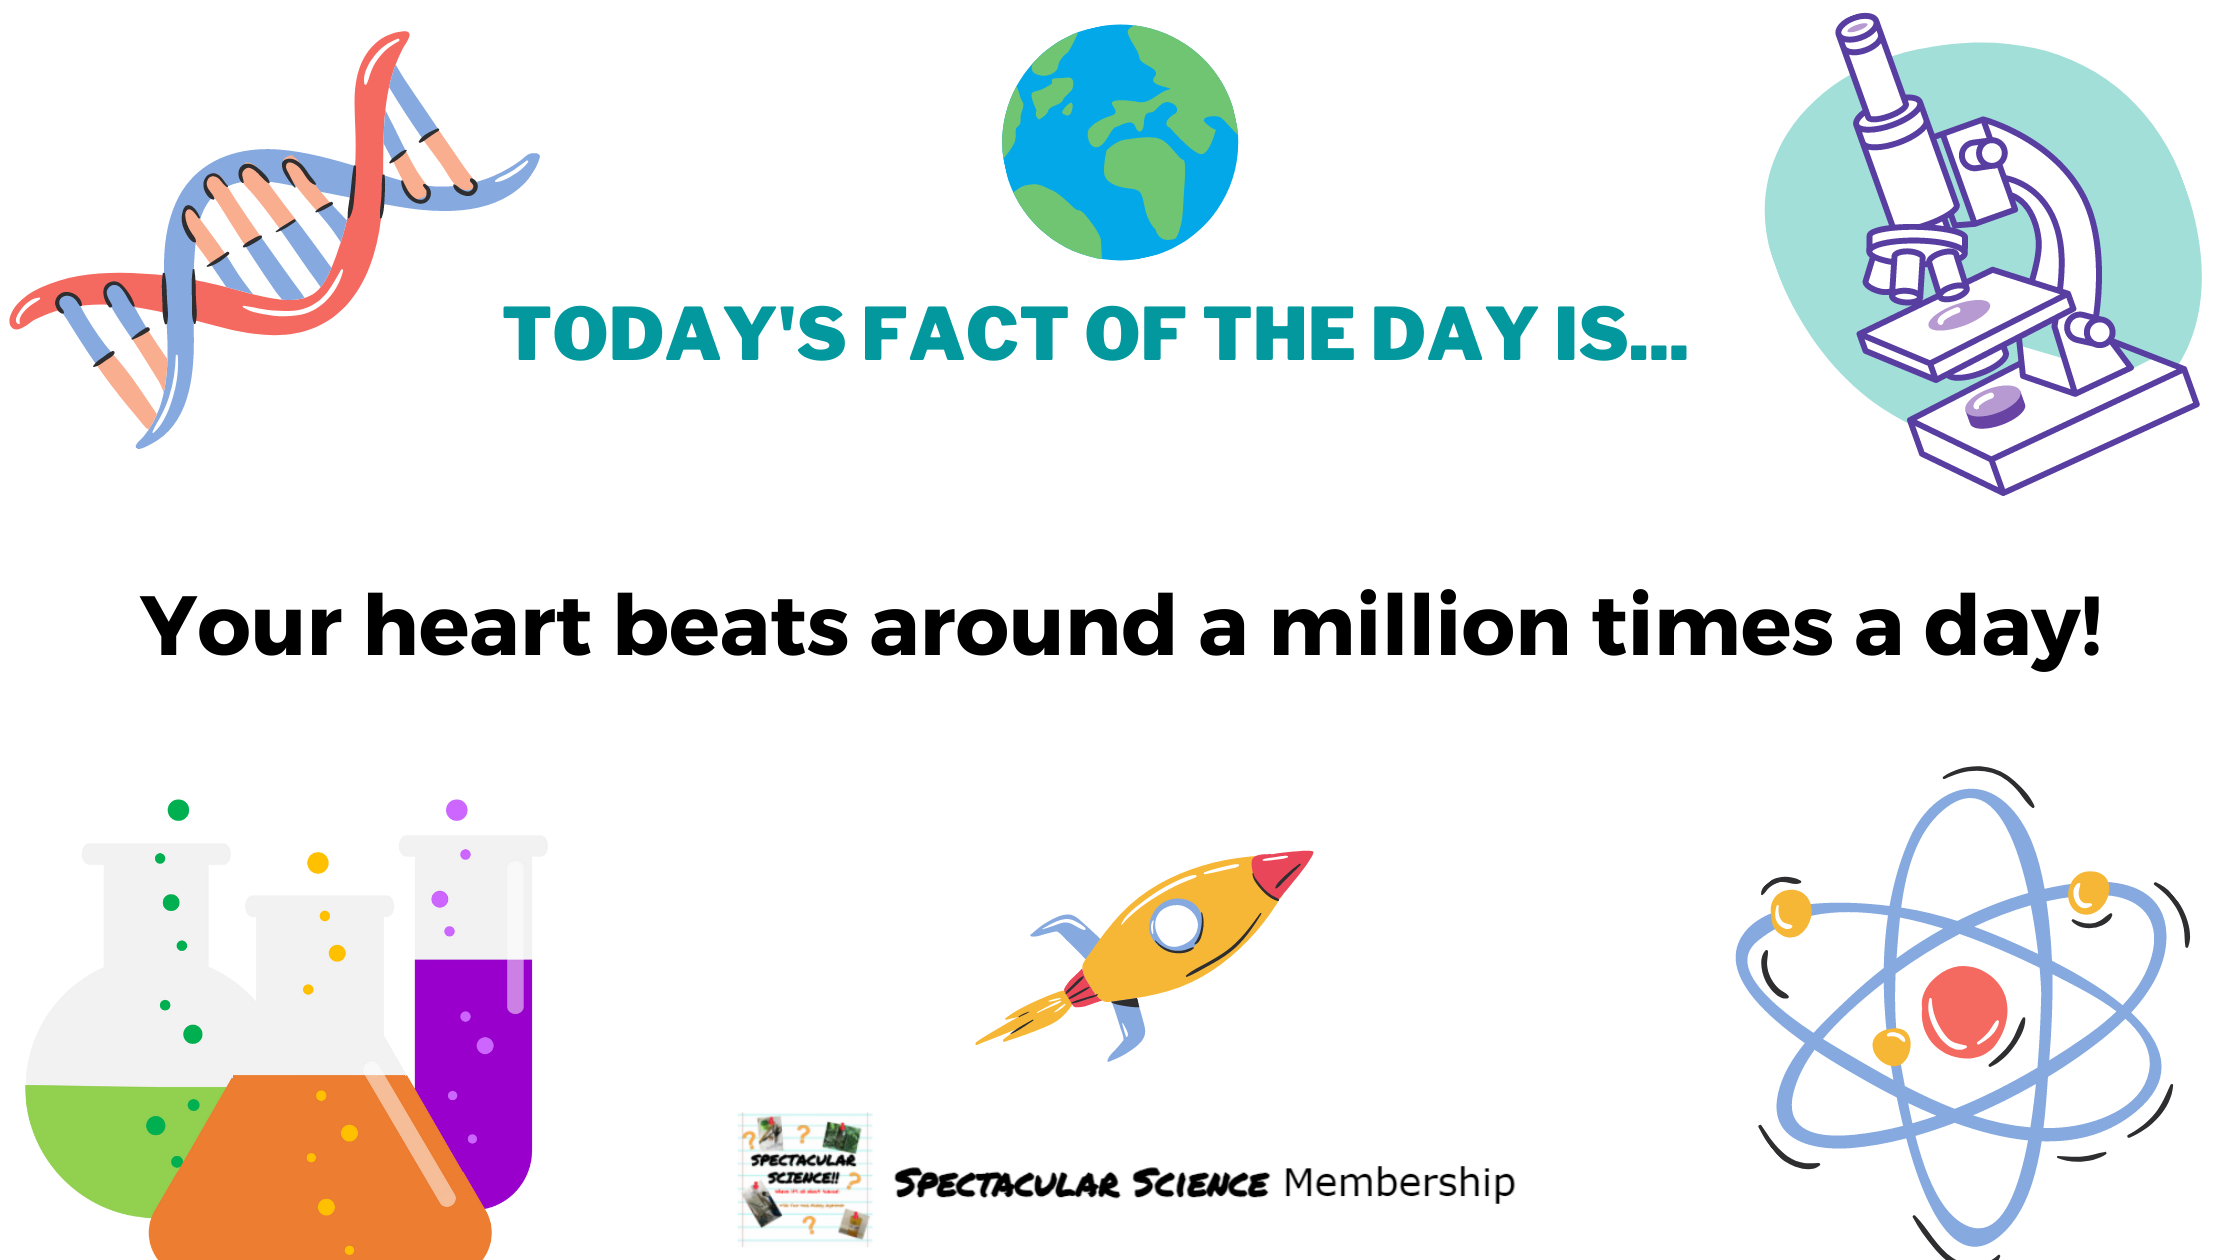 Fact of the Day Image Dec. 10th